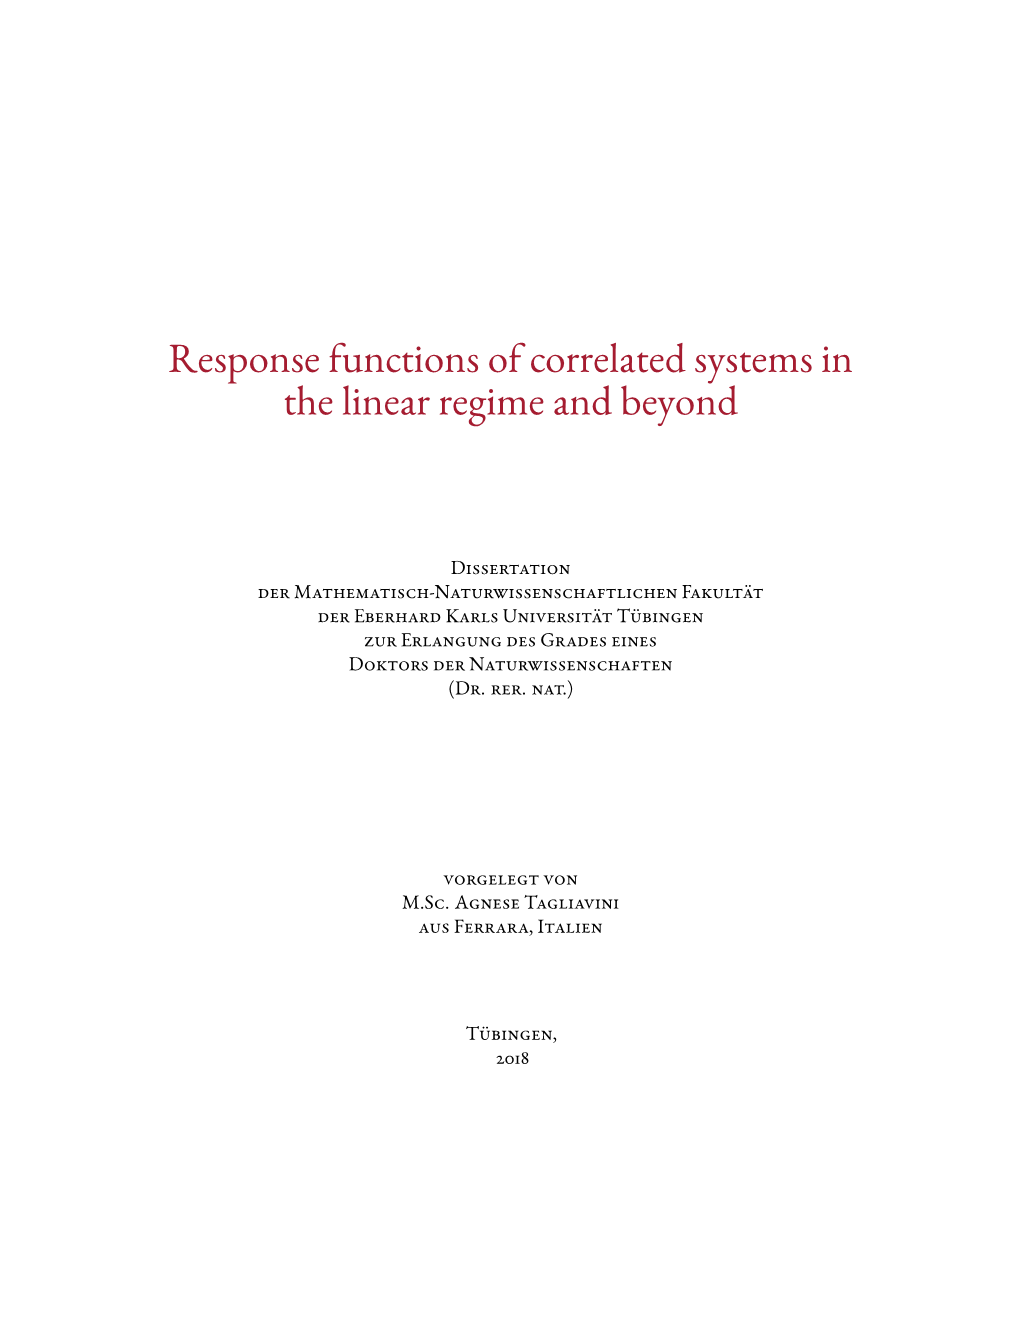 Response Functions of Correlated Systems in the Linear Regime and Beyond